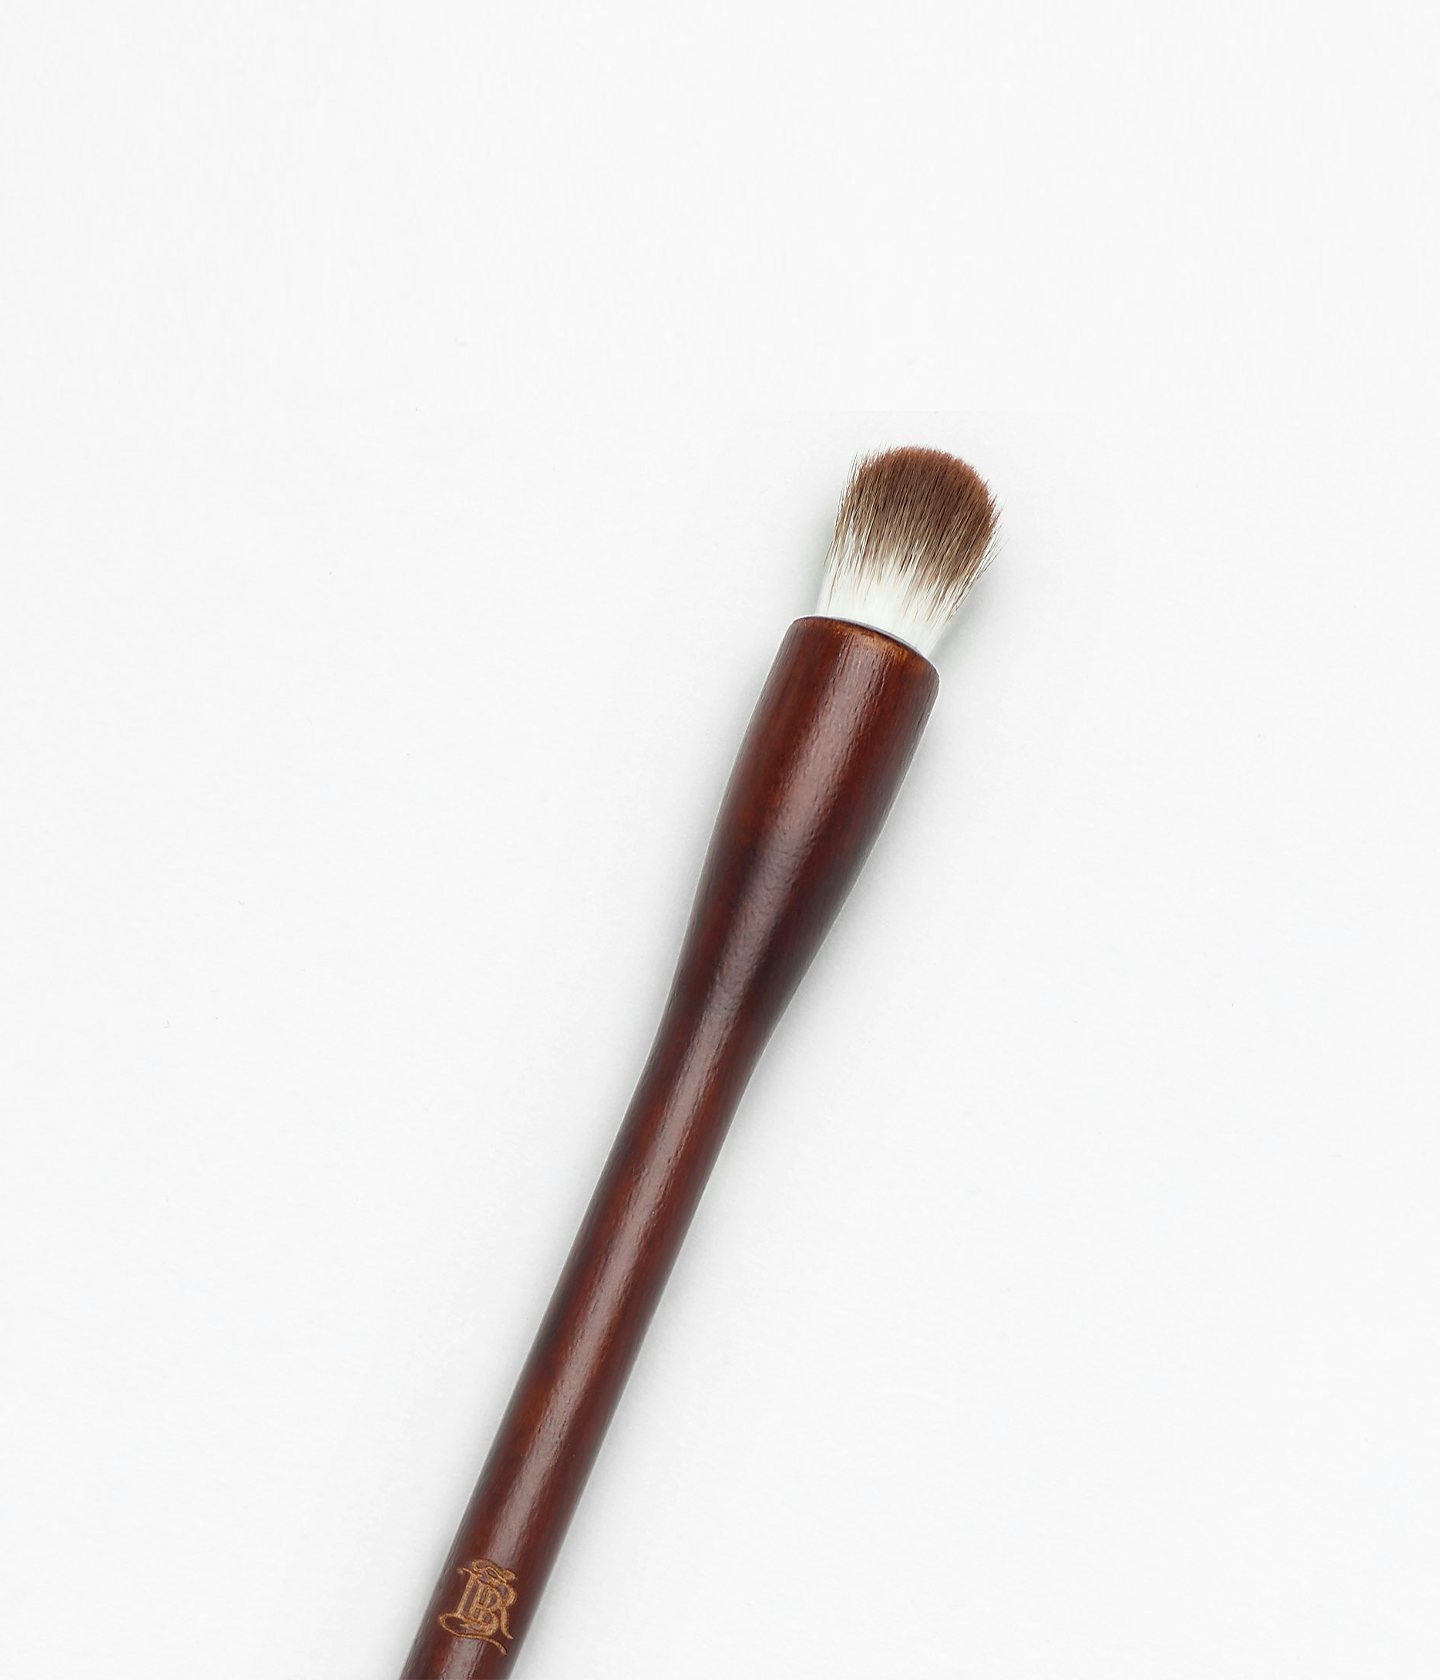 La bouche rouge eyeshadow shader brush zoomed in on the hairs of the brush